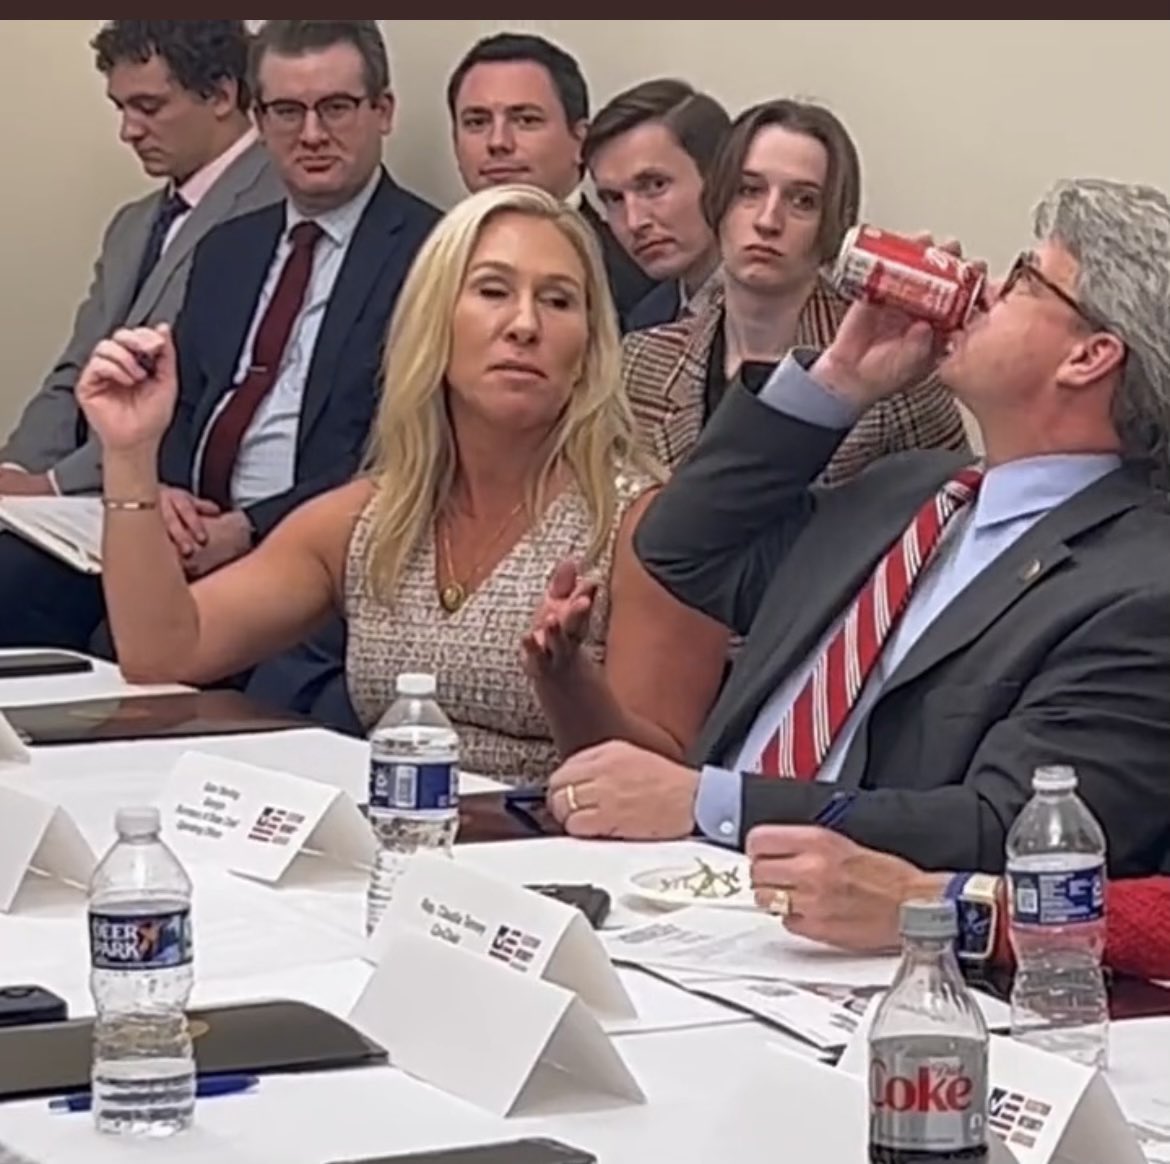 I had a discussion with the Election Integrity Caucus. A big part of that is talking truthfully about the challenges in elections and identifying REAL issues. Some still deal in disproven conspiracies. It’s a challenge we all face, but having a @CocaCola makes everything better.